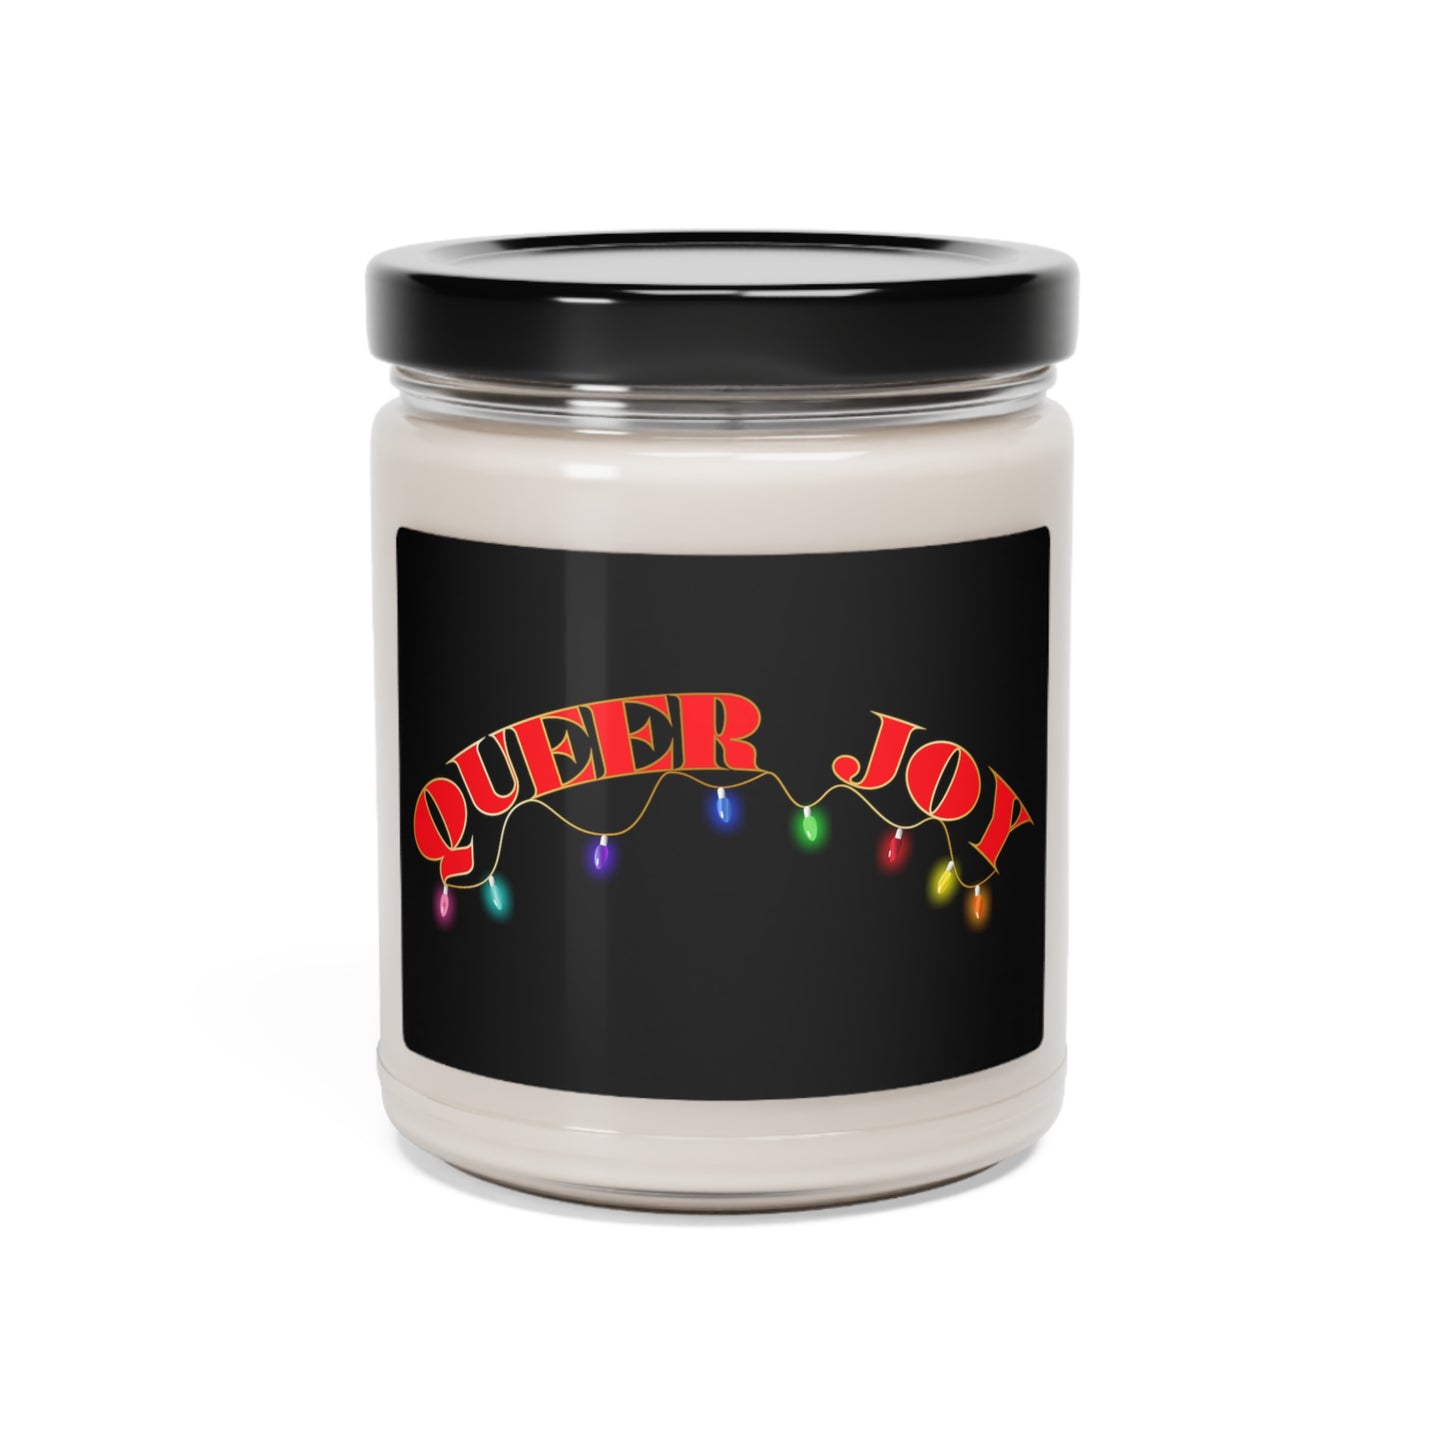 Queer Joy Candle